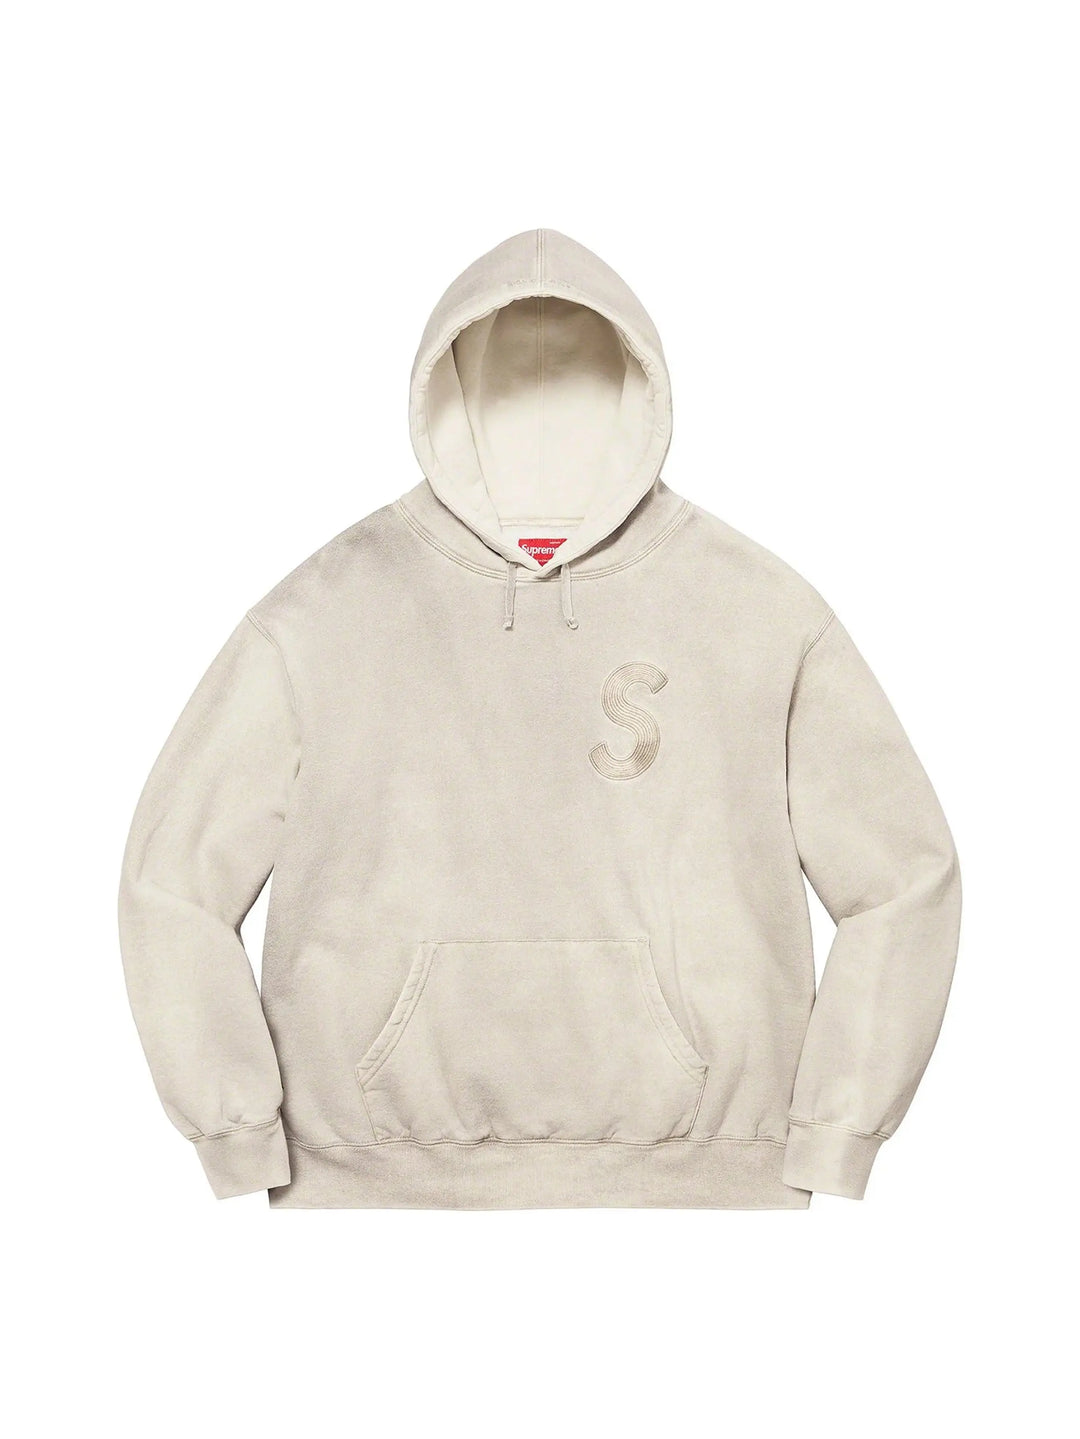 Supreme Overdyed S Logo Hooded Sweatshirt Natural in Auckland, New Zealand - Shop name